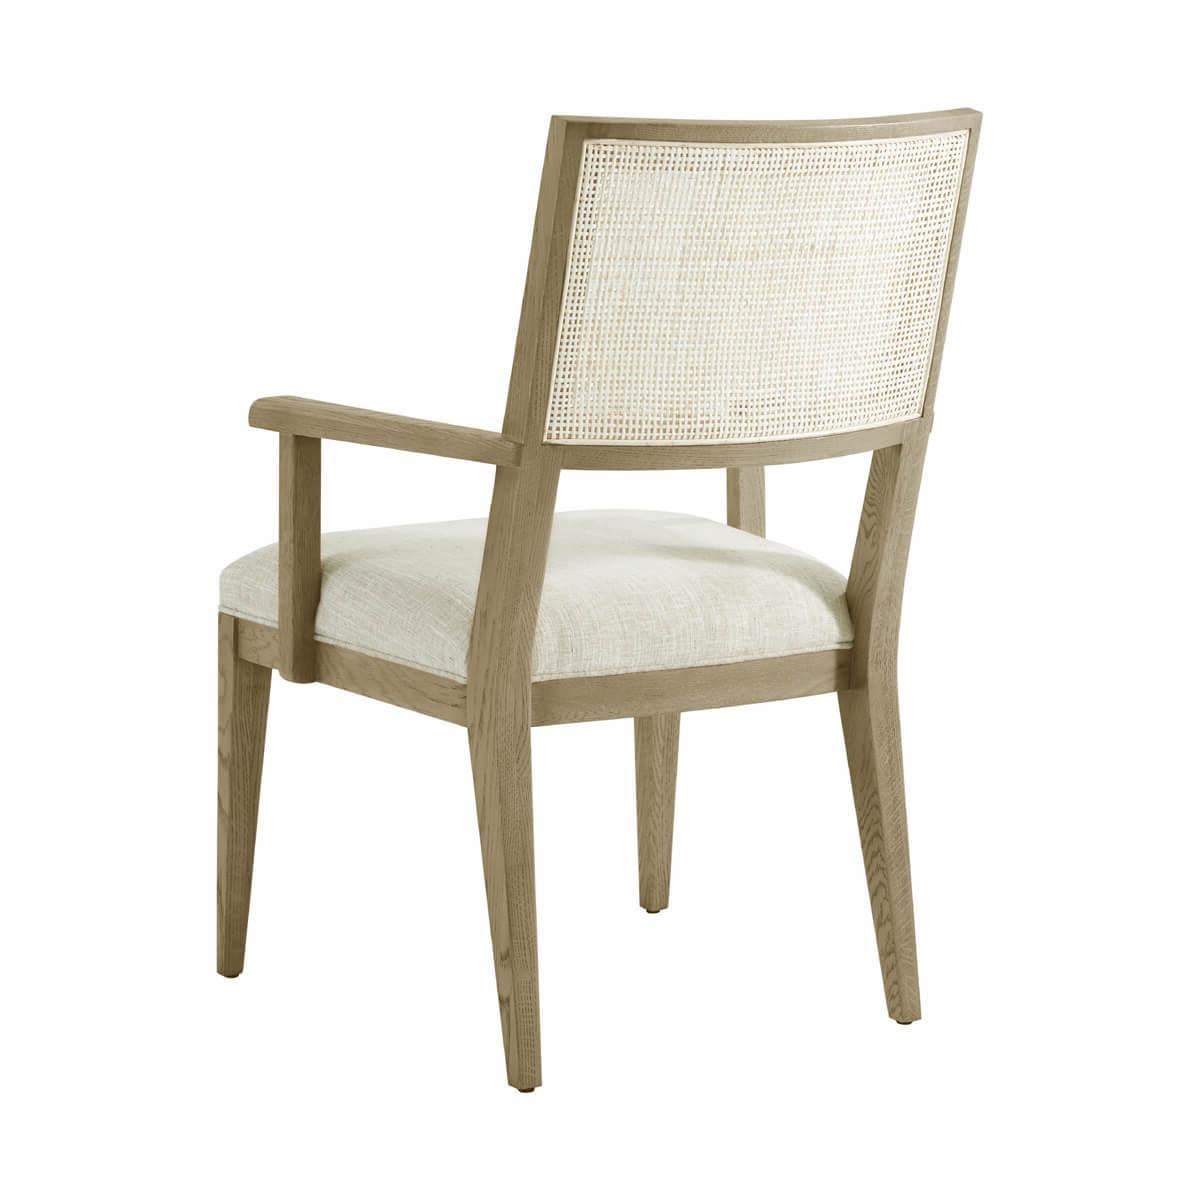 Dining Arm Chair, a solid frame in our light Dune finish, with a curved and caned backrest, a padded and upholstered seat cushions raised on tapered legs.

Dimensions: 24